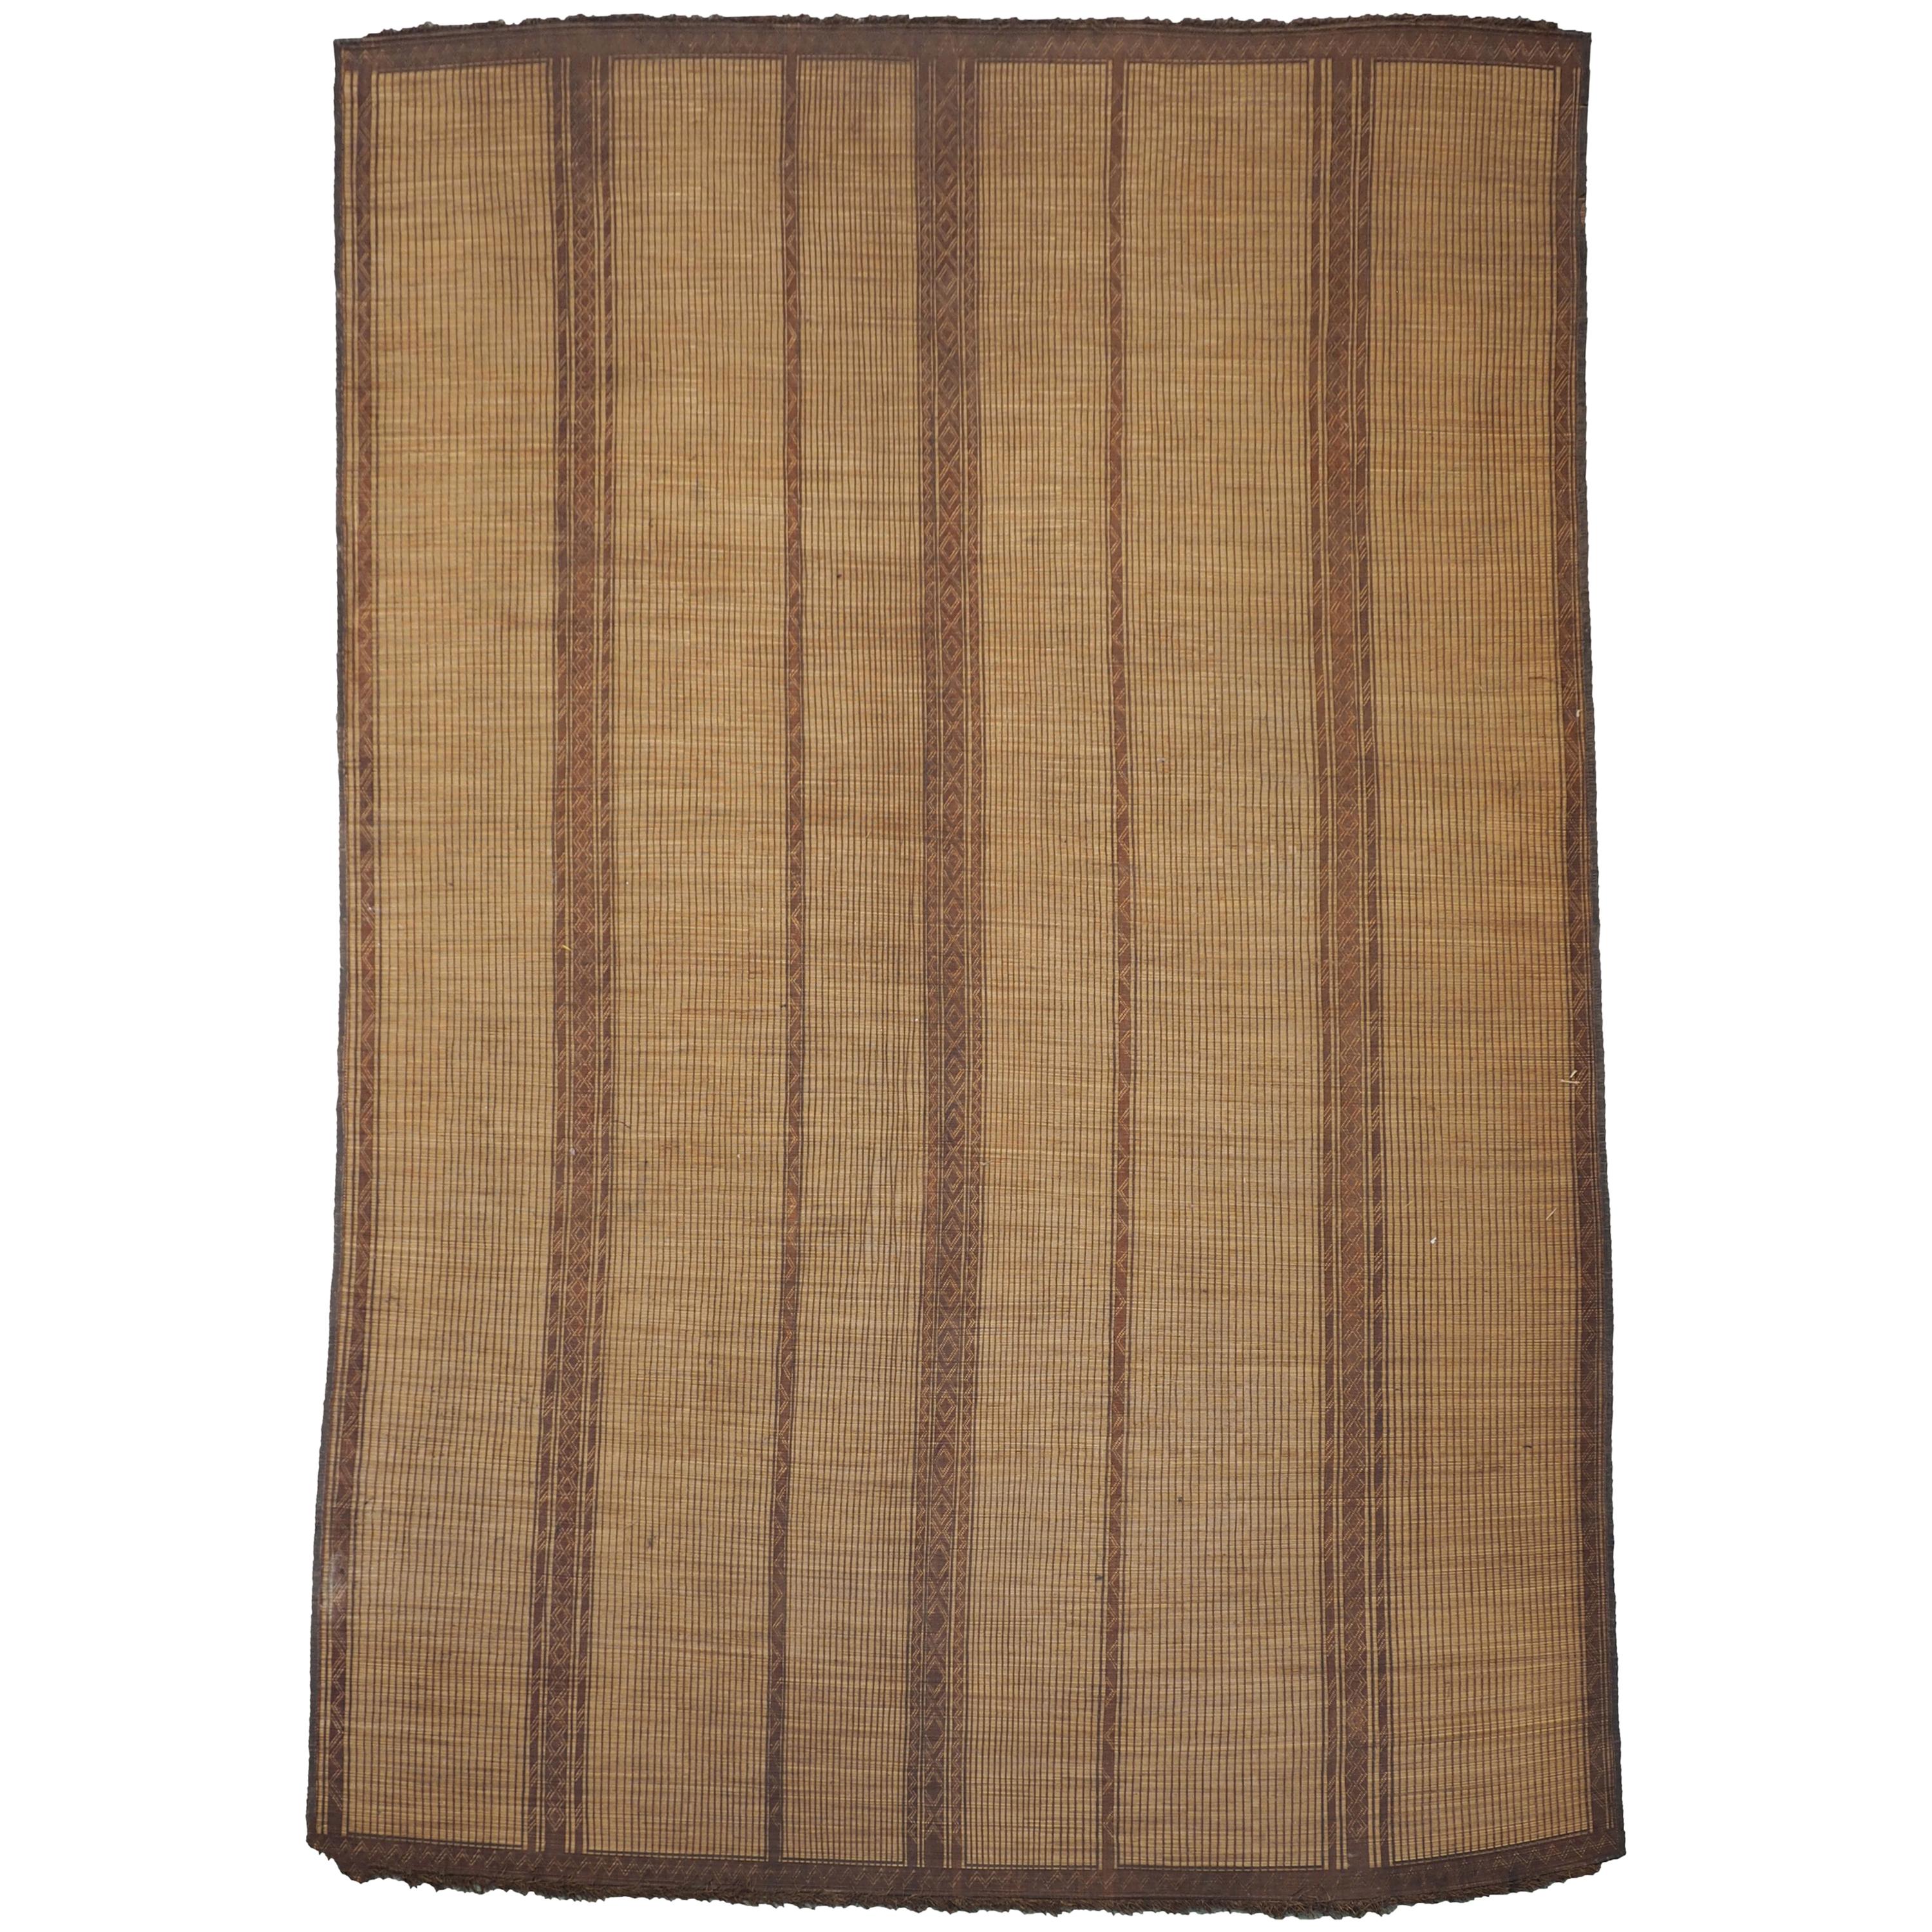 Mauritania Mat from Sahara in Leather and Palm Wood, Mid-Century Modern Design